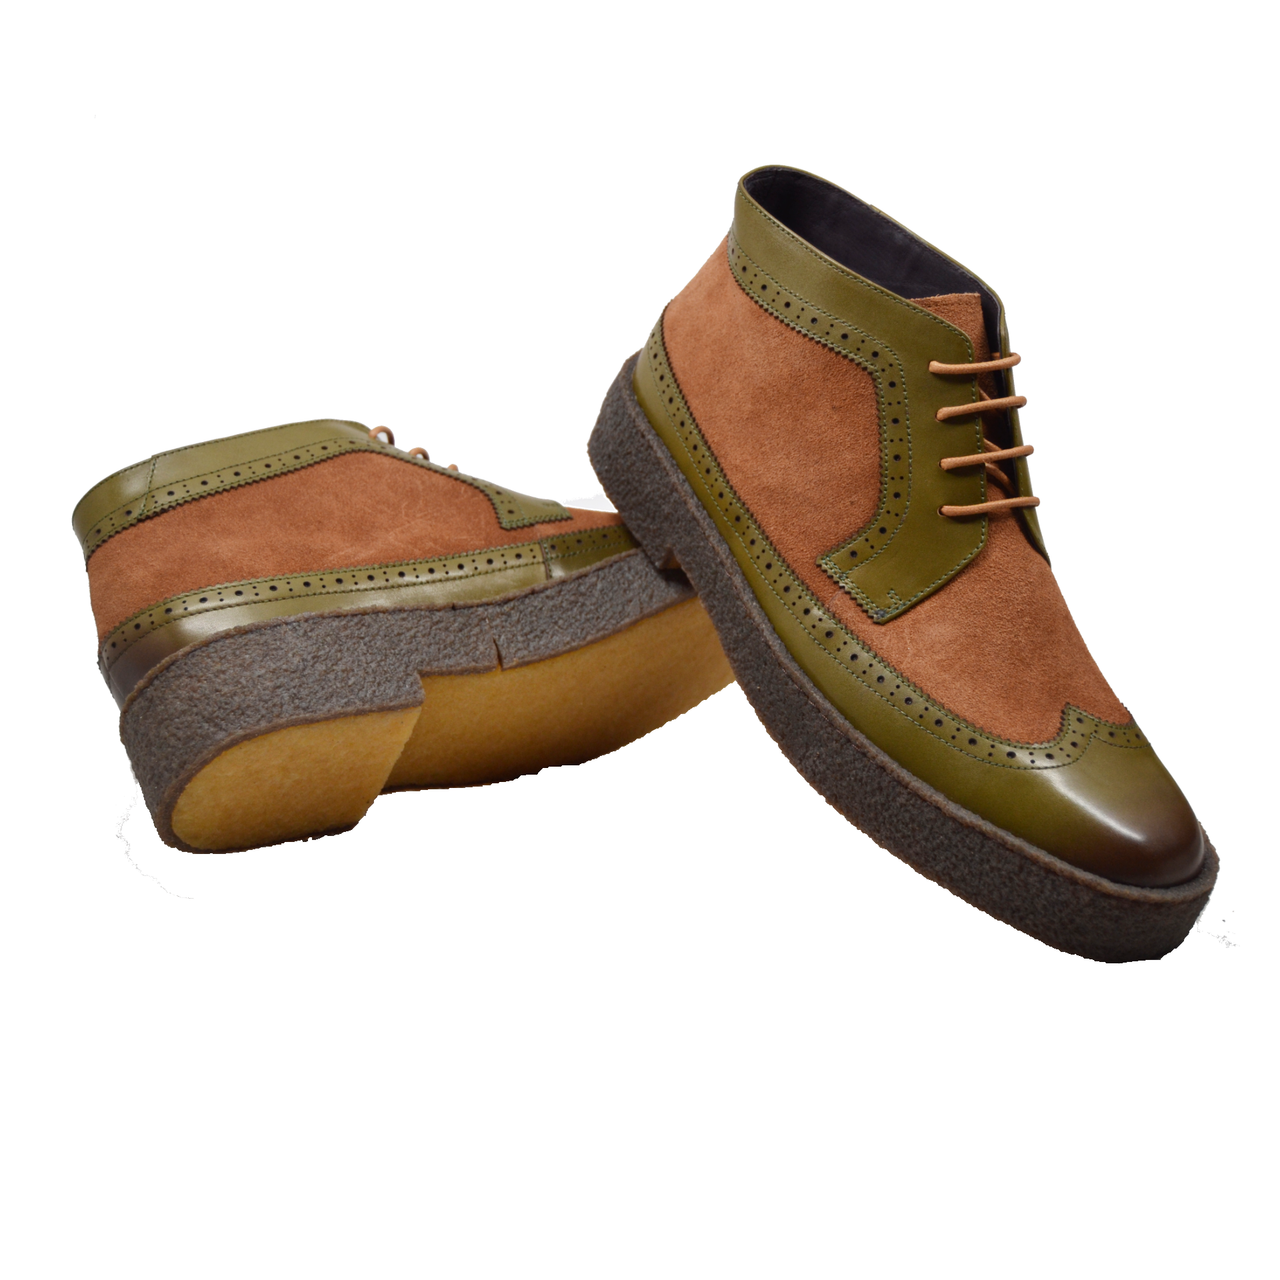 British Walkers Custom Made Original Playboy Wingtips Men's Green Leather and Brown Suede High Tops